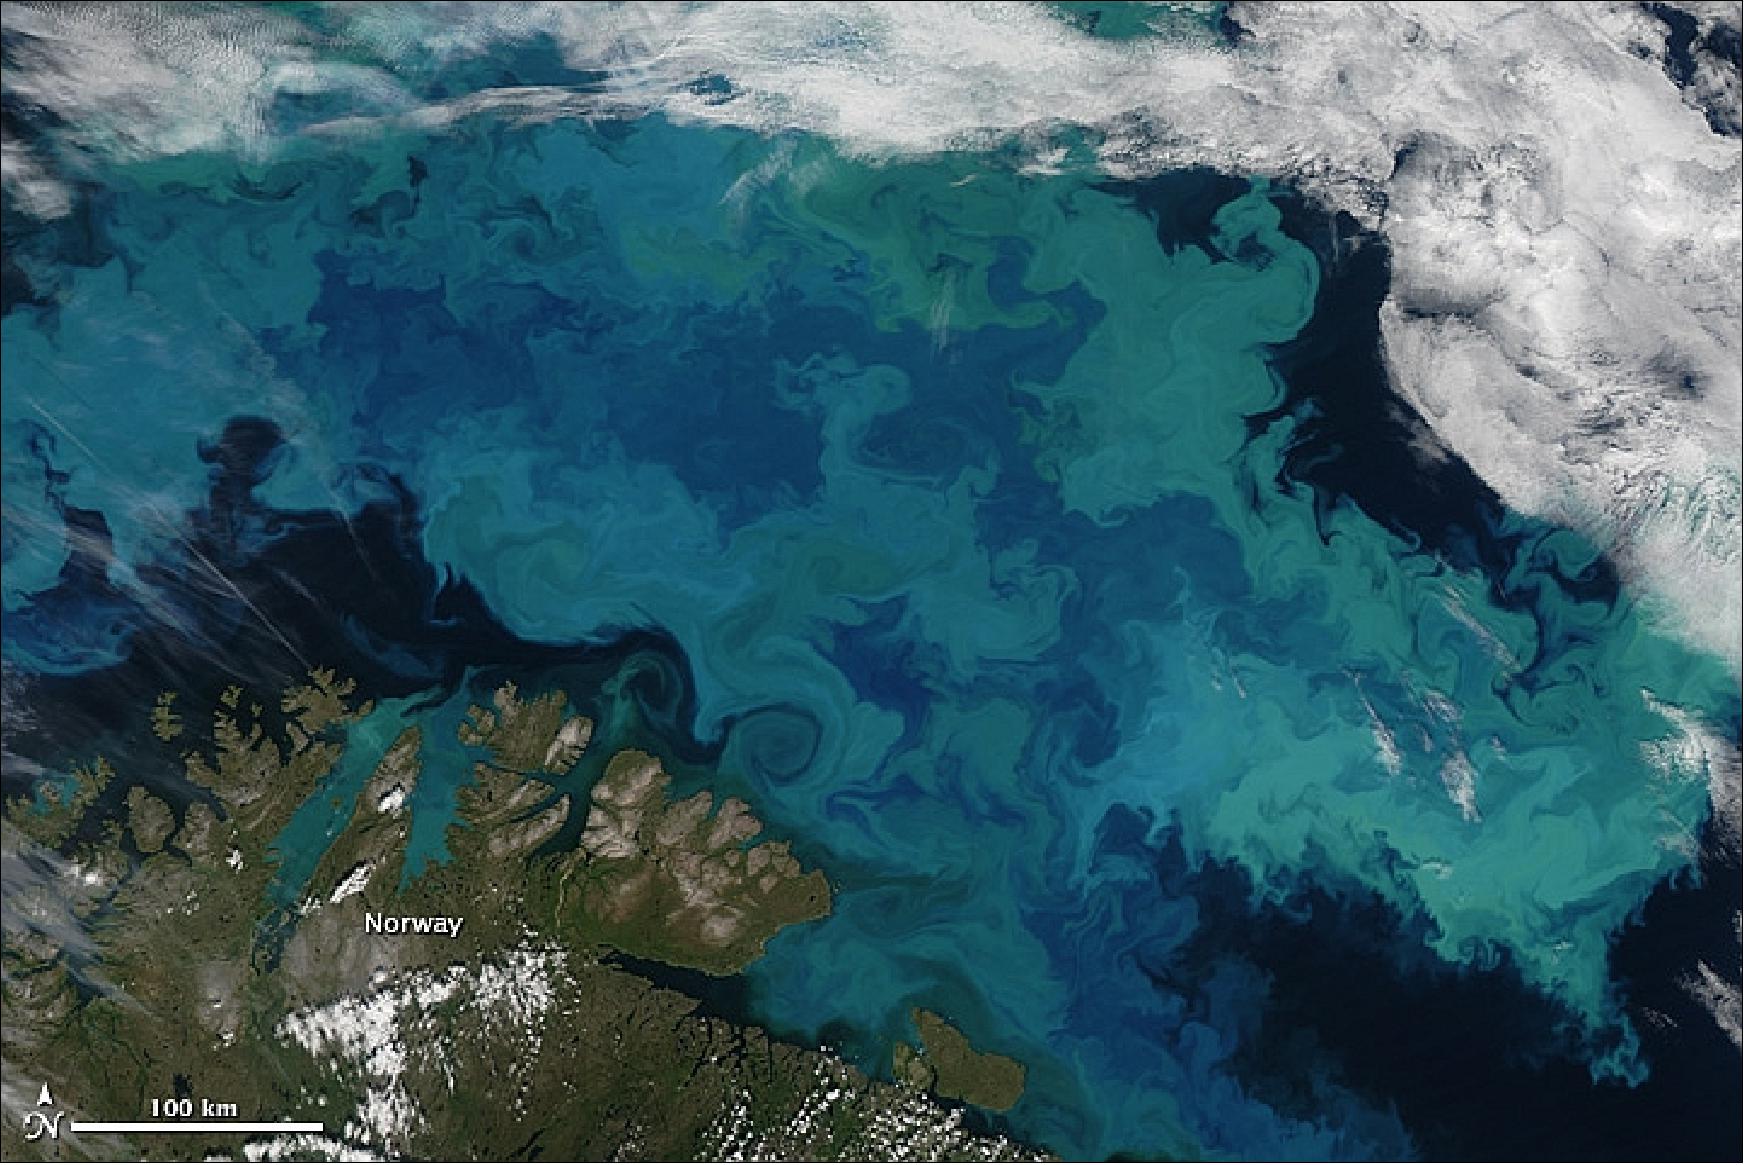 Figure 137: MODIS image of phytoplankton bloom in the Barents Sea observed on August 14, 2011 (image credit: NASA)